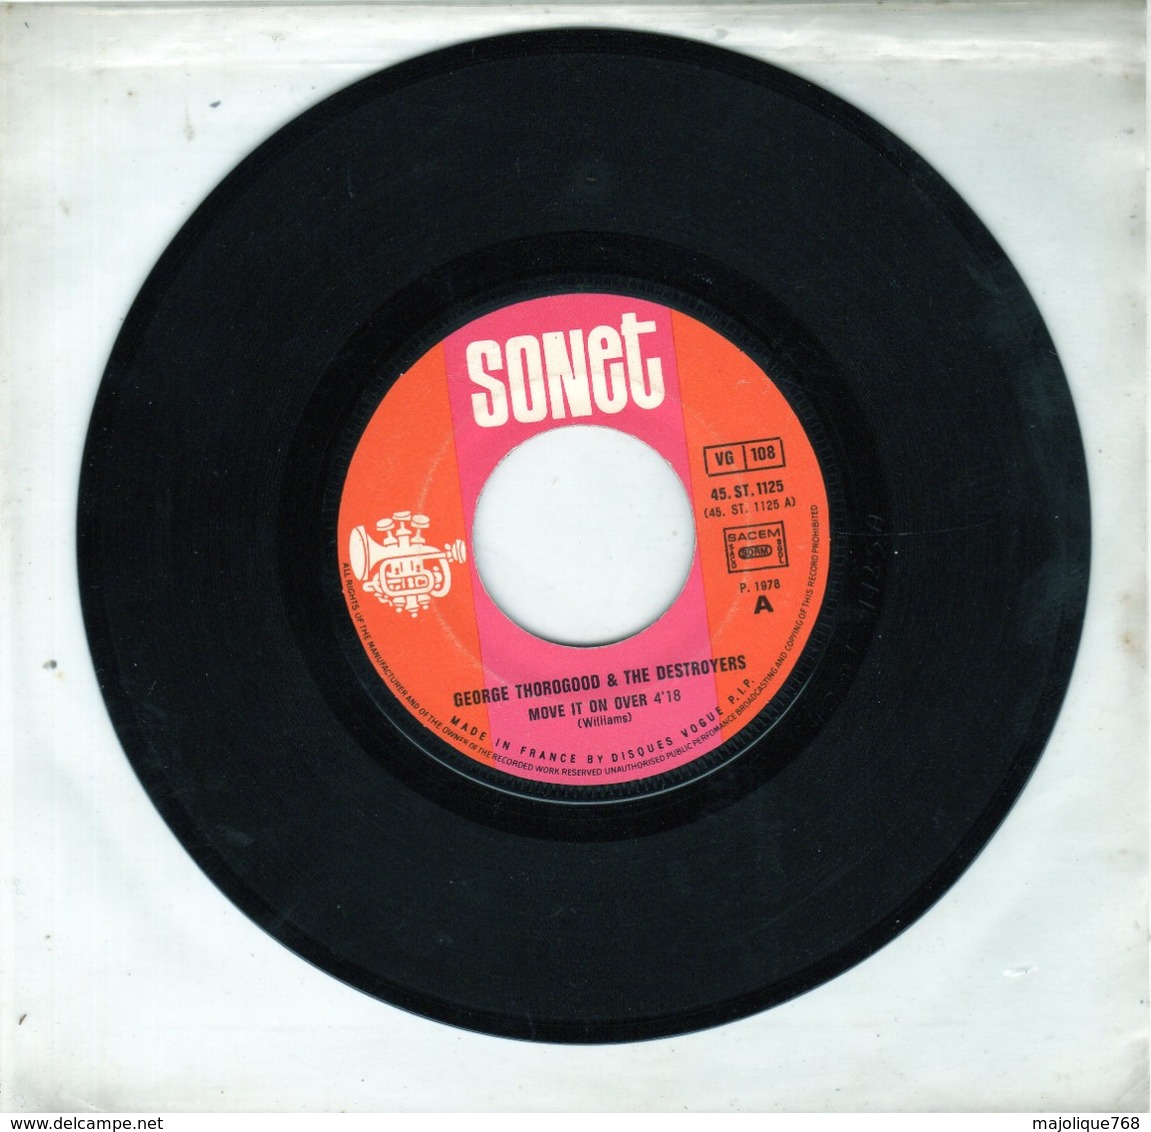 Georges Thorogood & The Destroyers - Move It On Over - Cocaine Blues - Sonet 45.ST.1125 - 1978 - - Blues